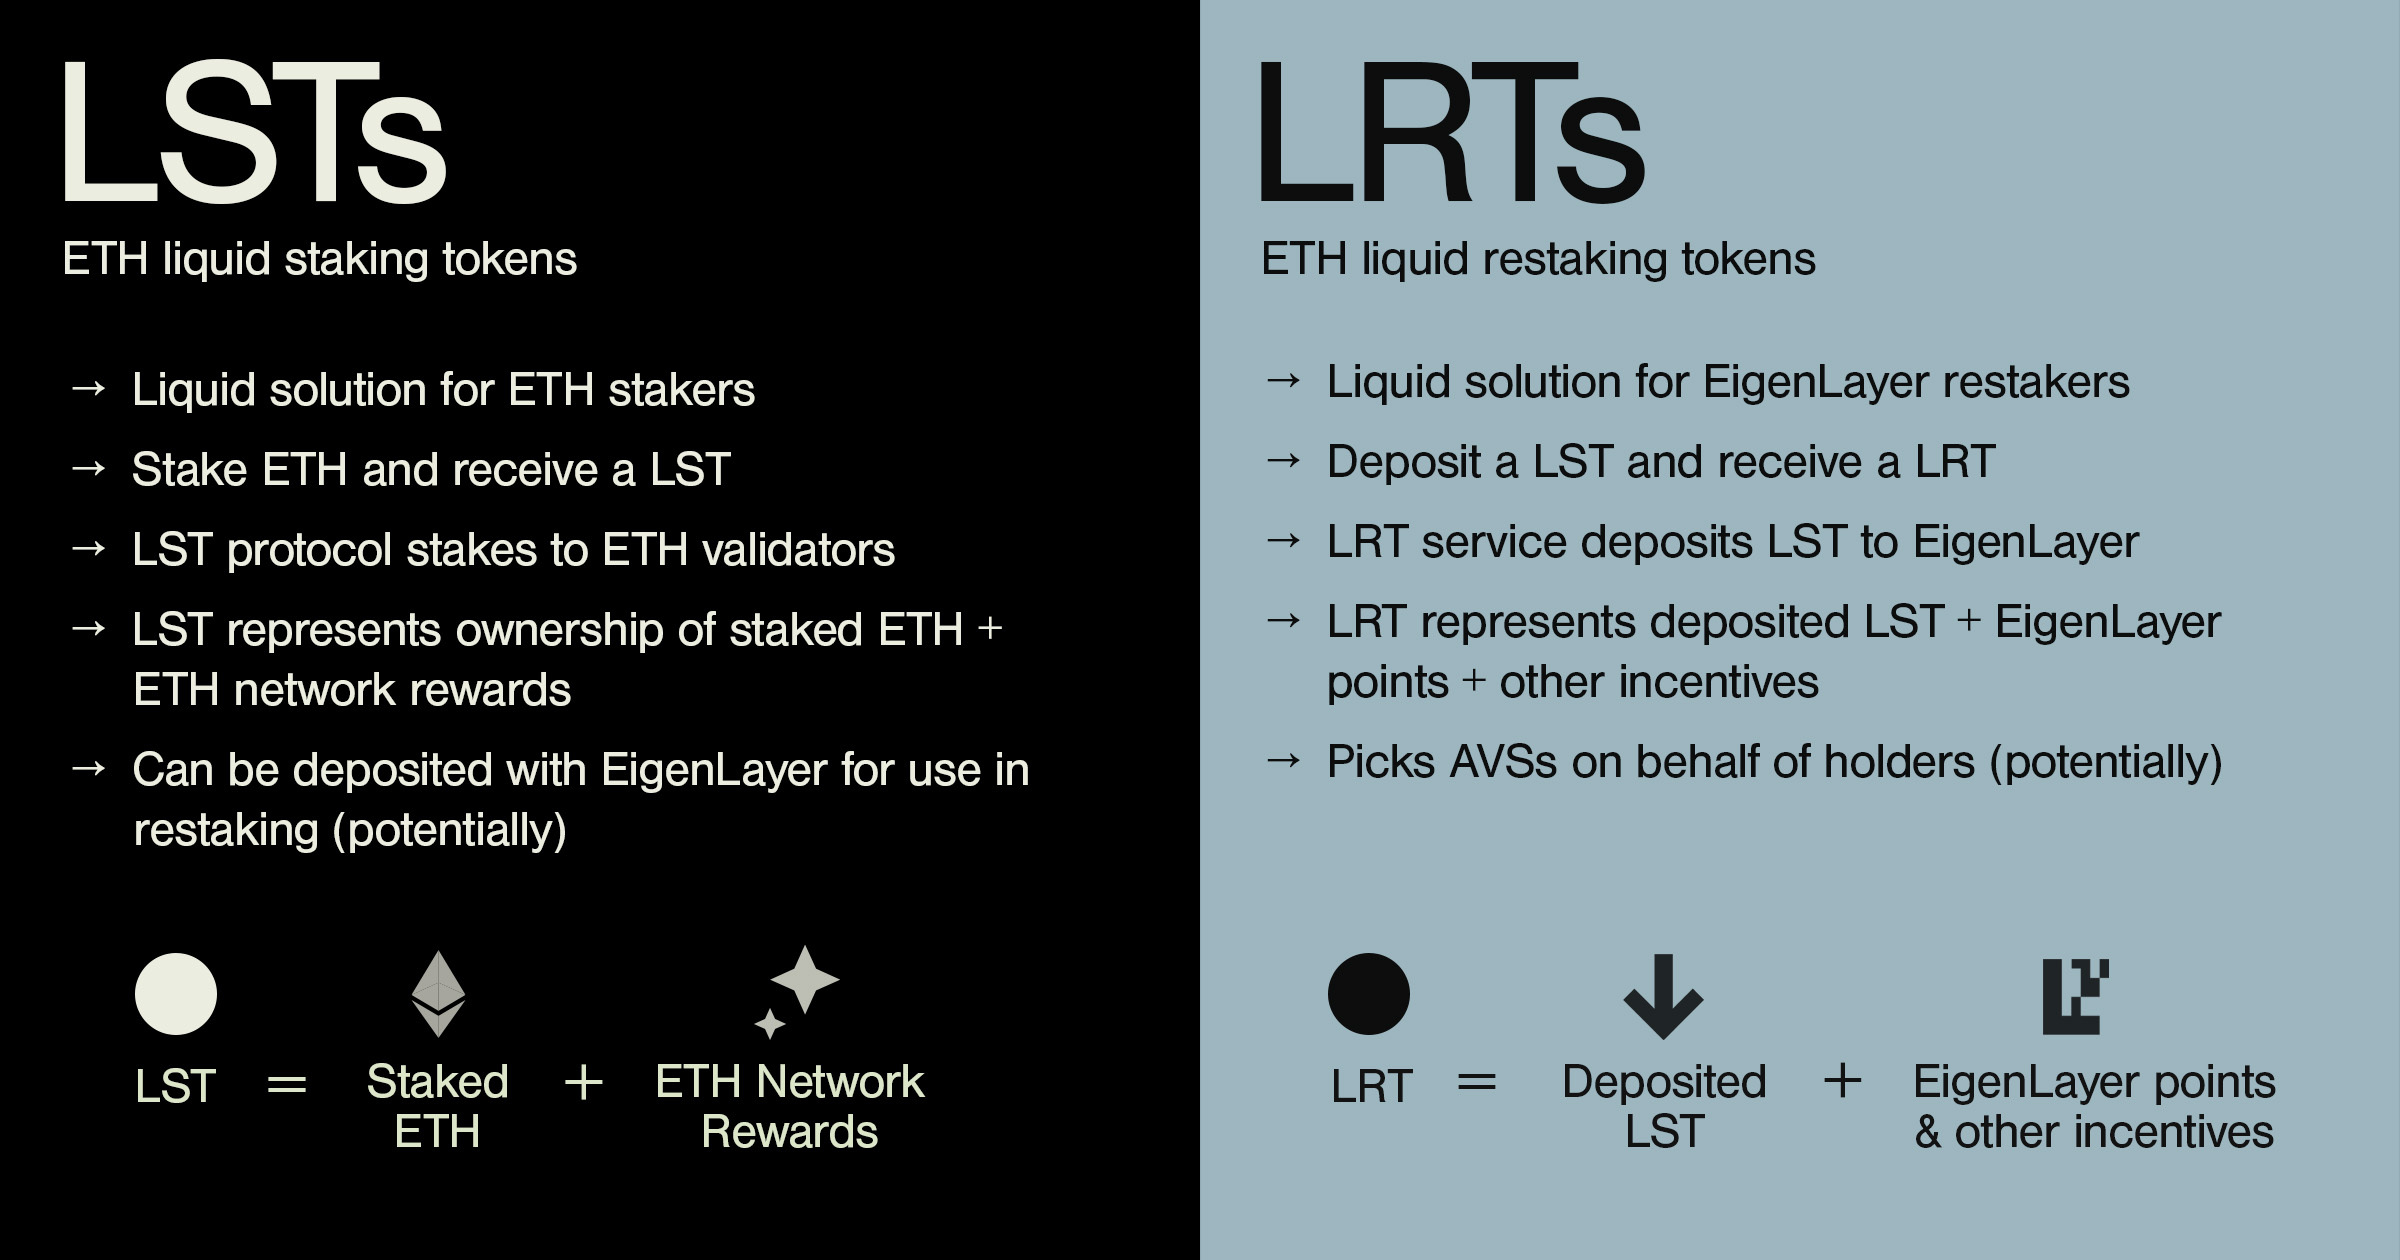 The difference between LSTs and LRTs